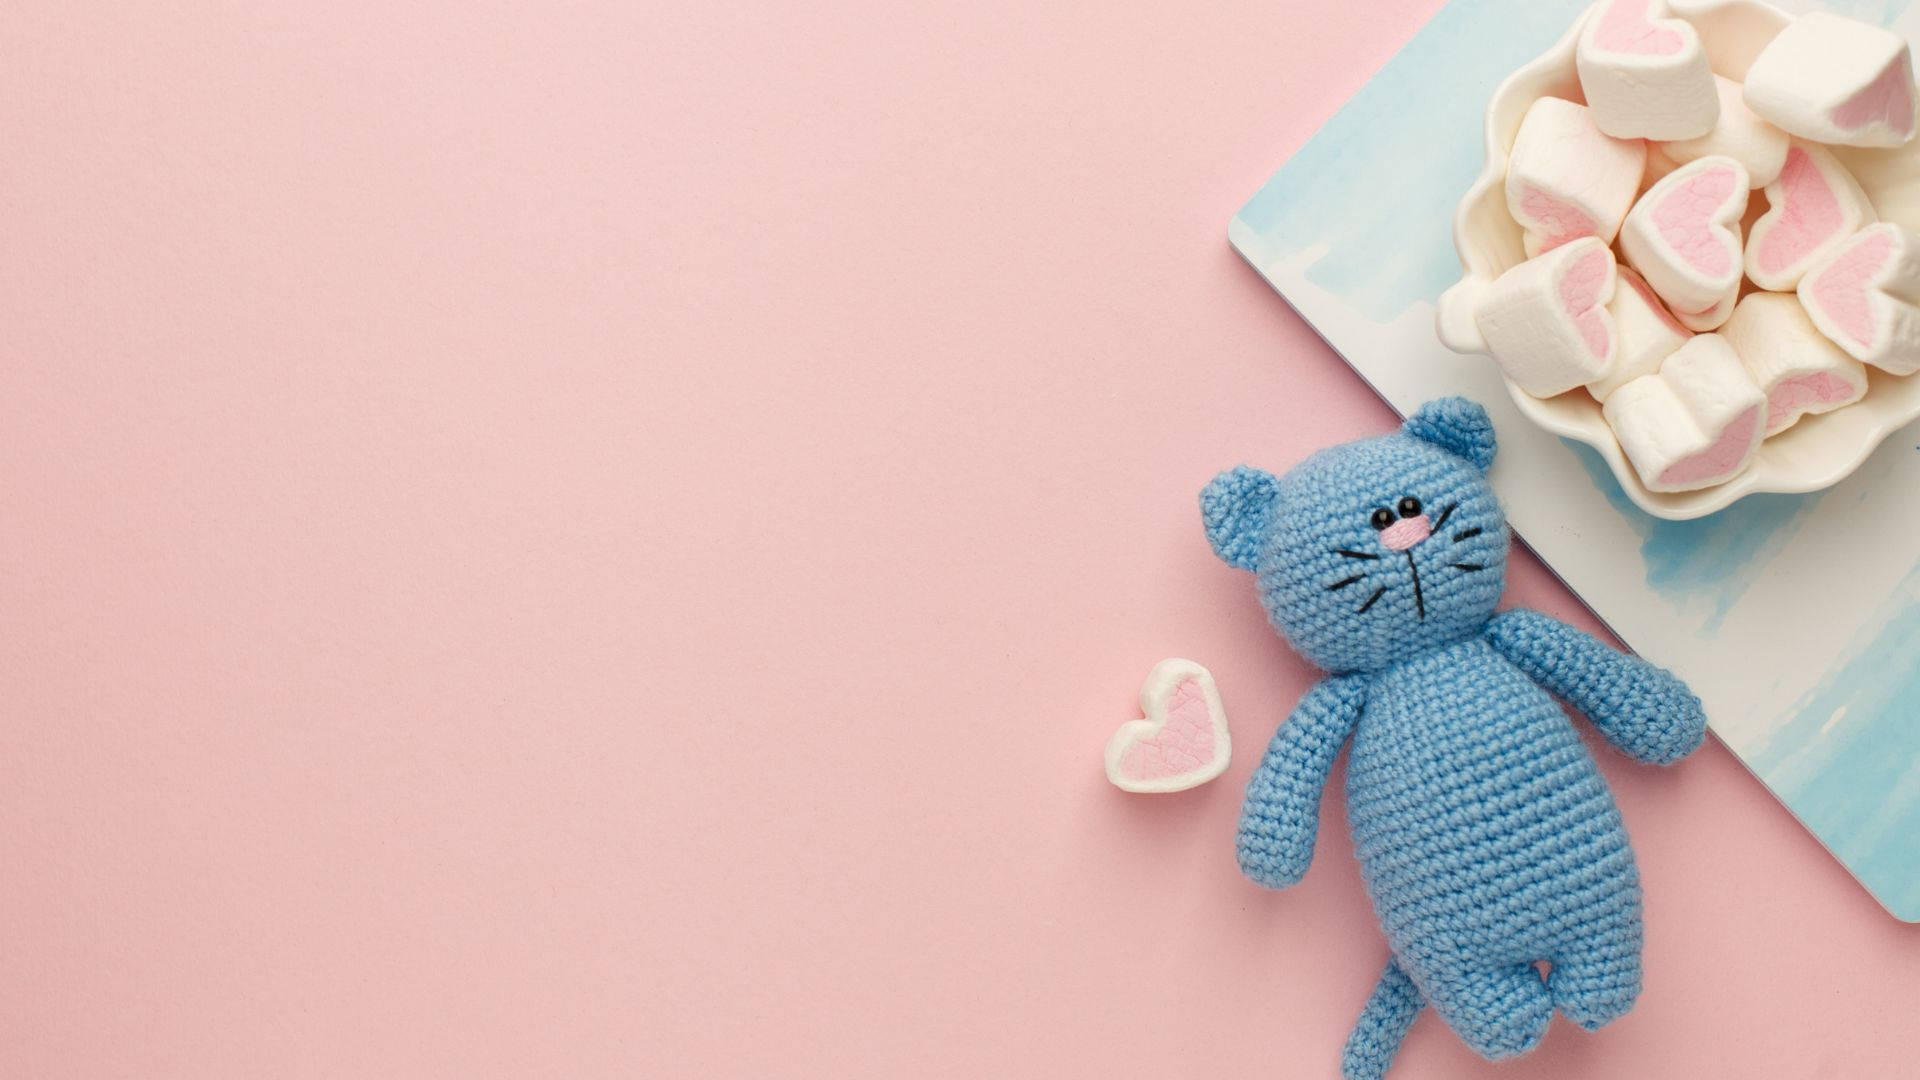 A Blue Crochet Cat With Marshmallows On A Pink Background Wallpaper